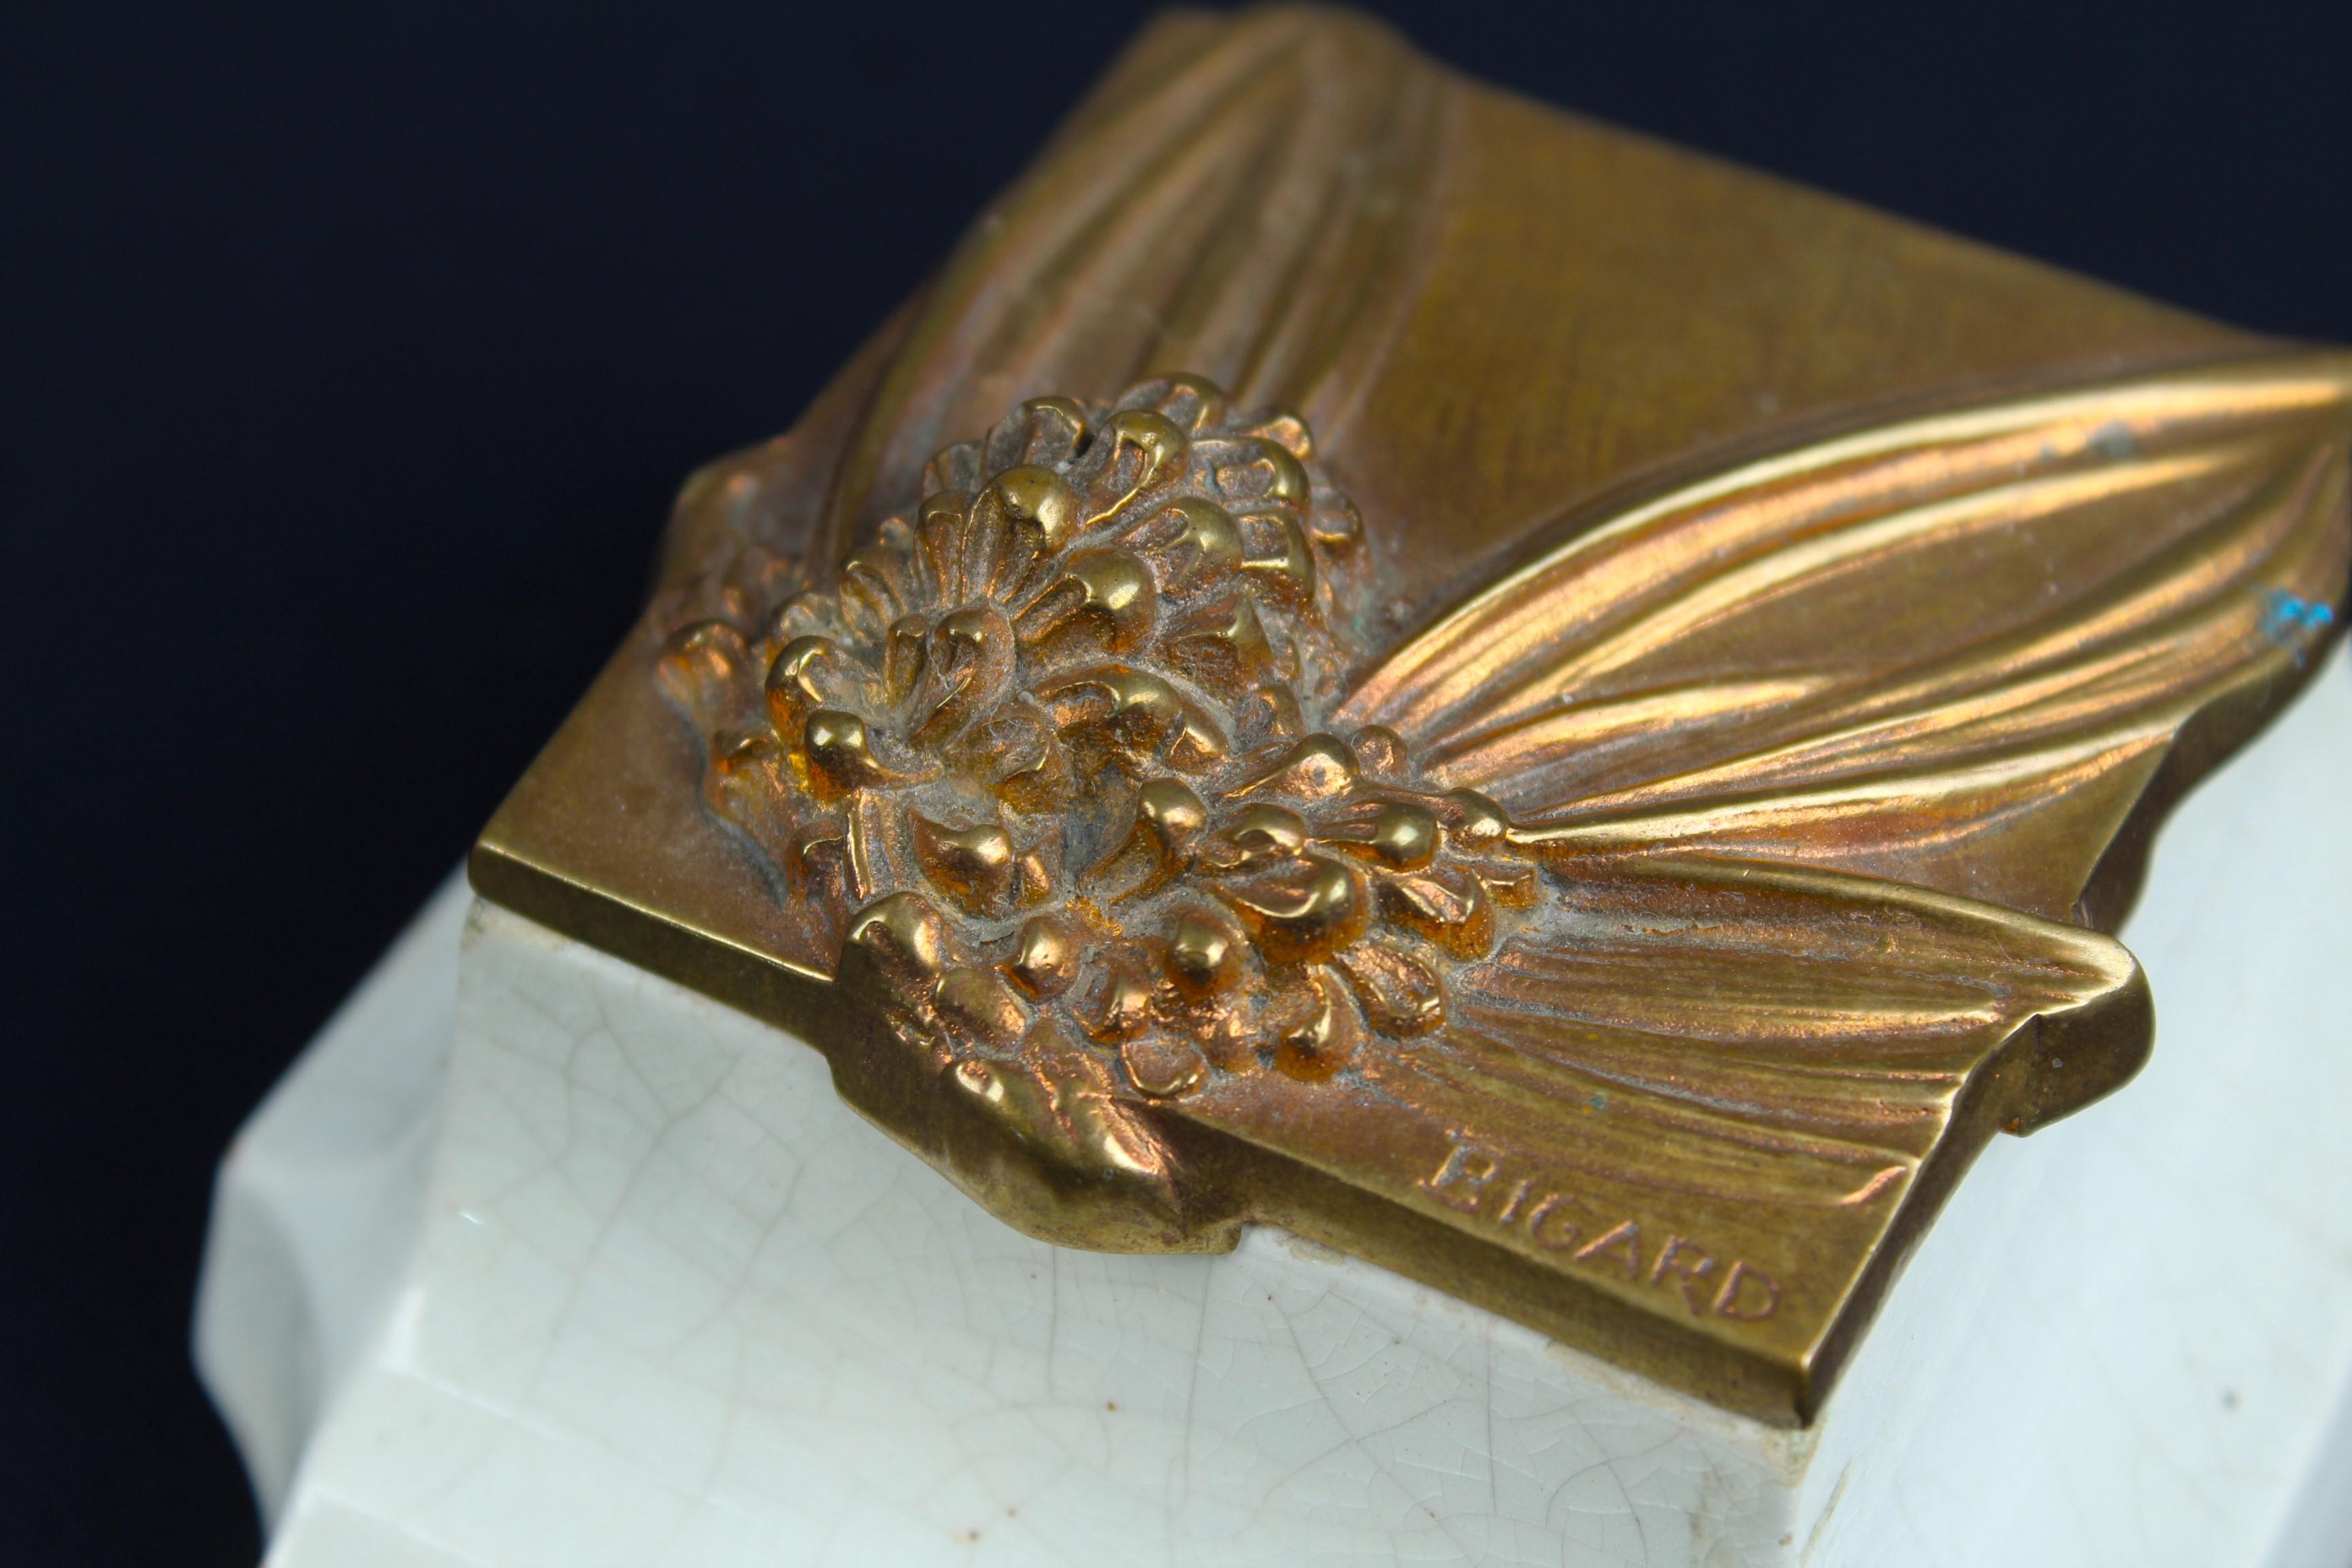 Exceptional beautiful inkwell by the french artist and sculptor Gaston Bigard.
Signed at the lid 